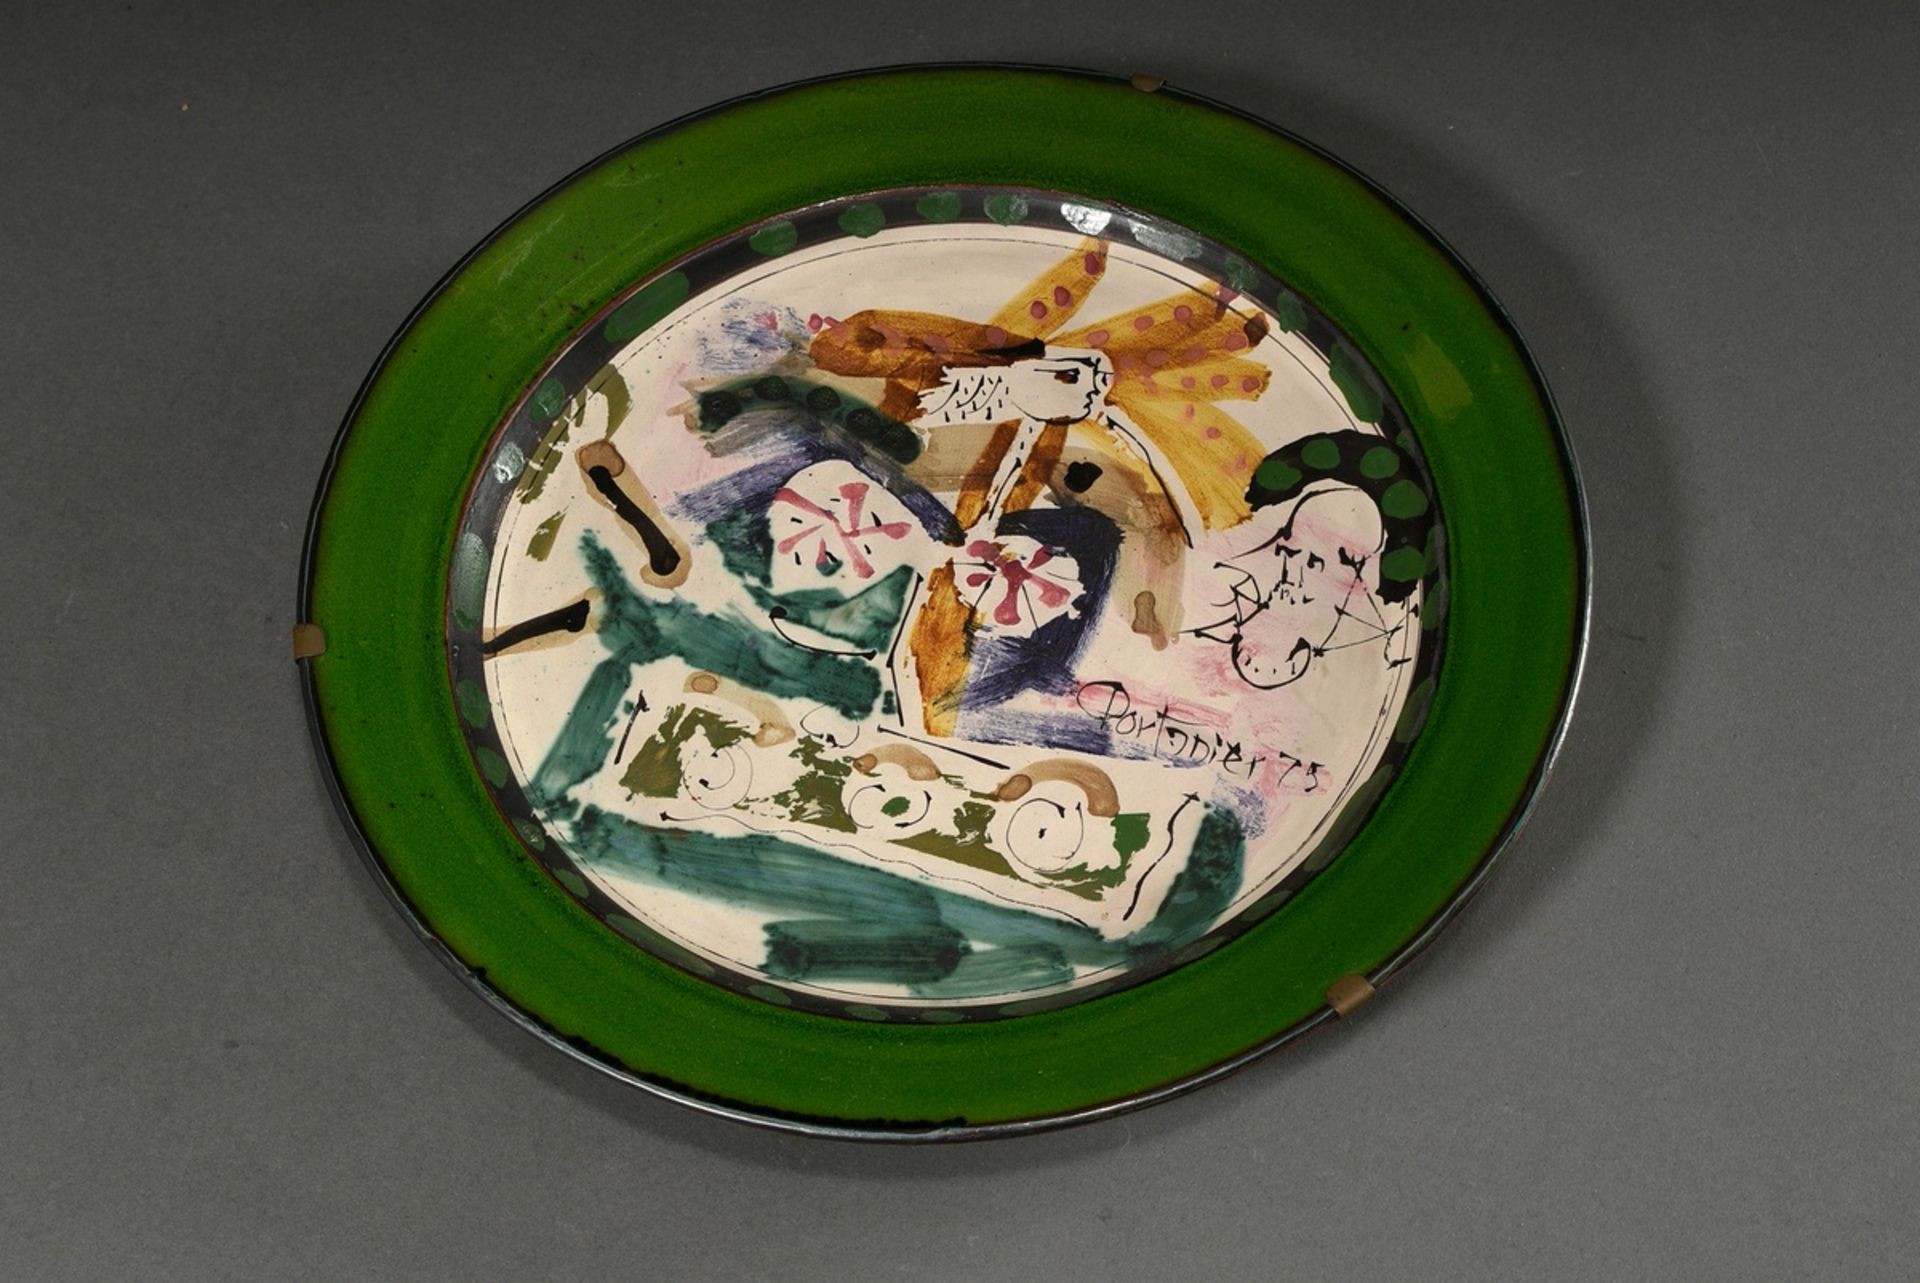 Studio ceramic plate by Gilbert Portanier, Vallauris, abstract figural representation, signed Porta - Image 2 of 5